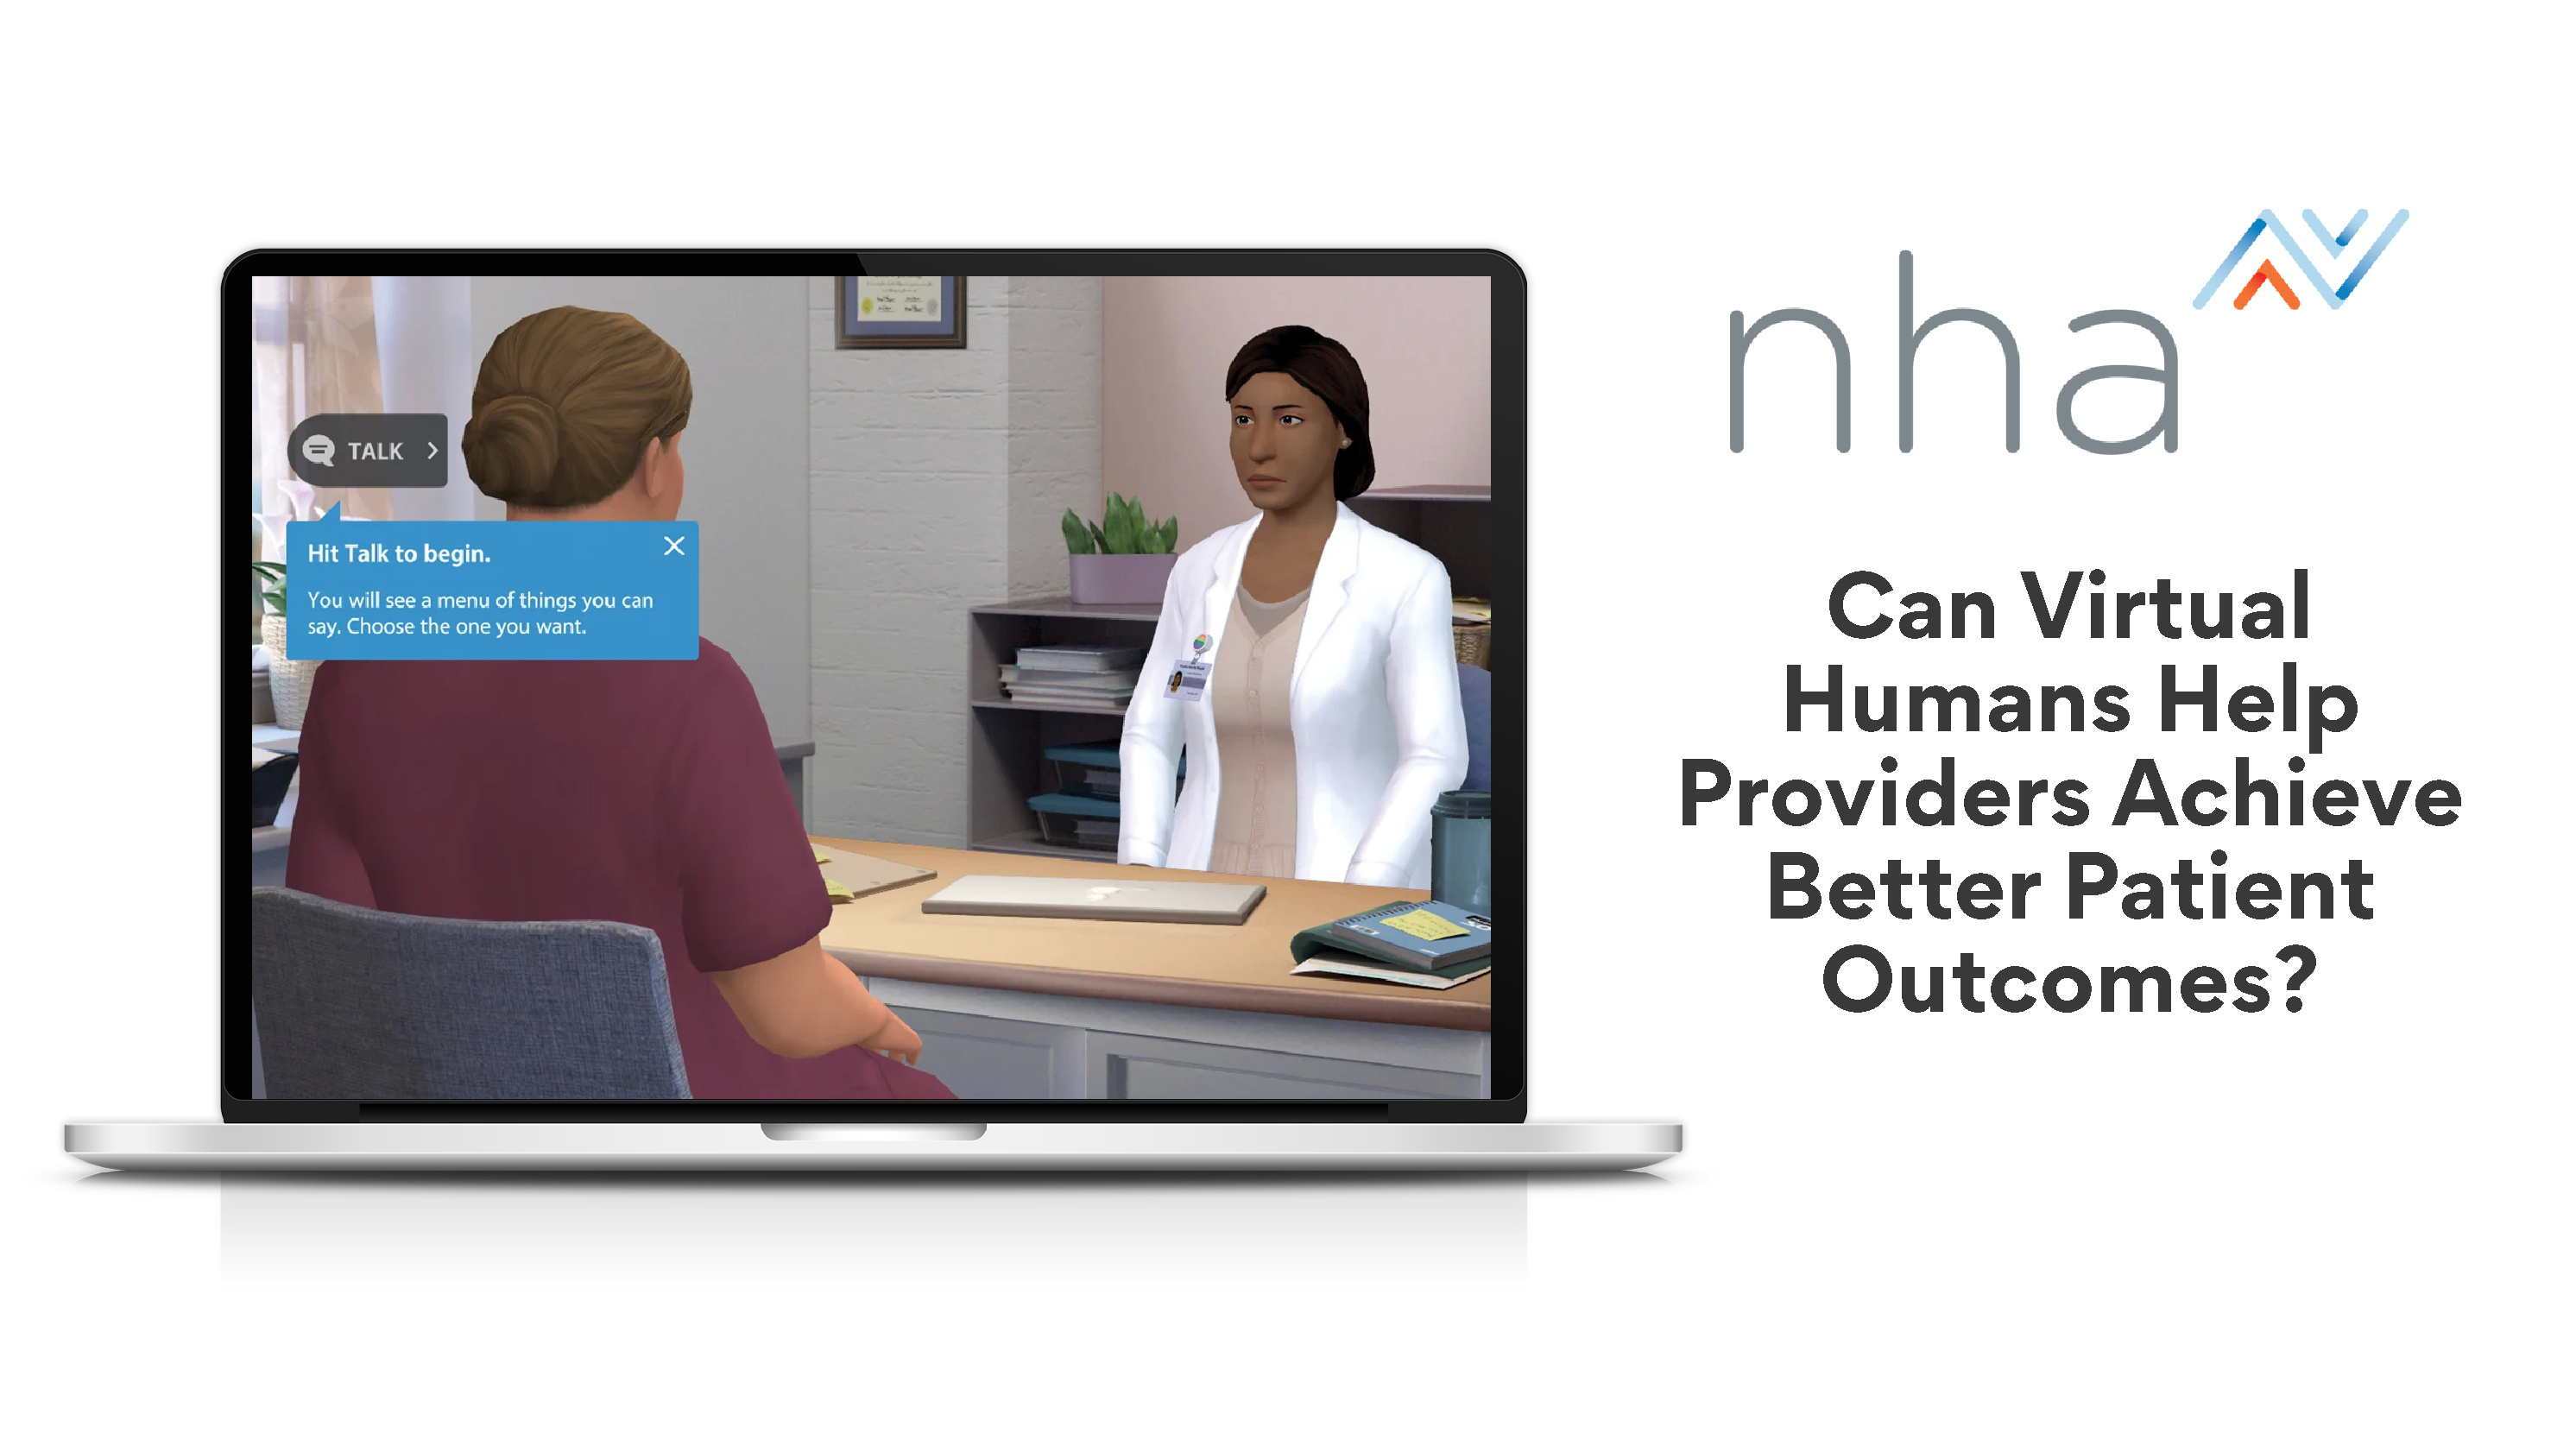 Kognito Spotlight by NHA Allied Health – Can Virtual Humans Help Providers Achieve Better Patient Outcomes?